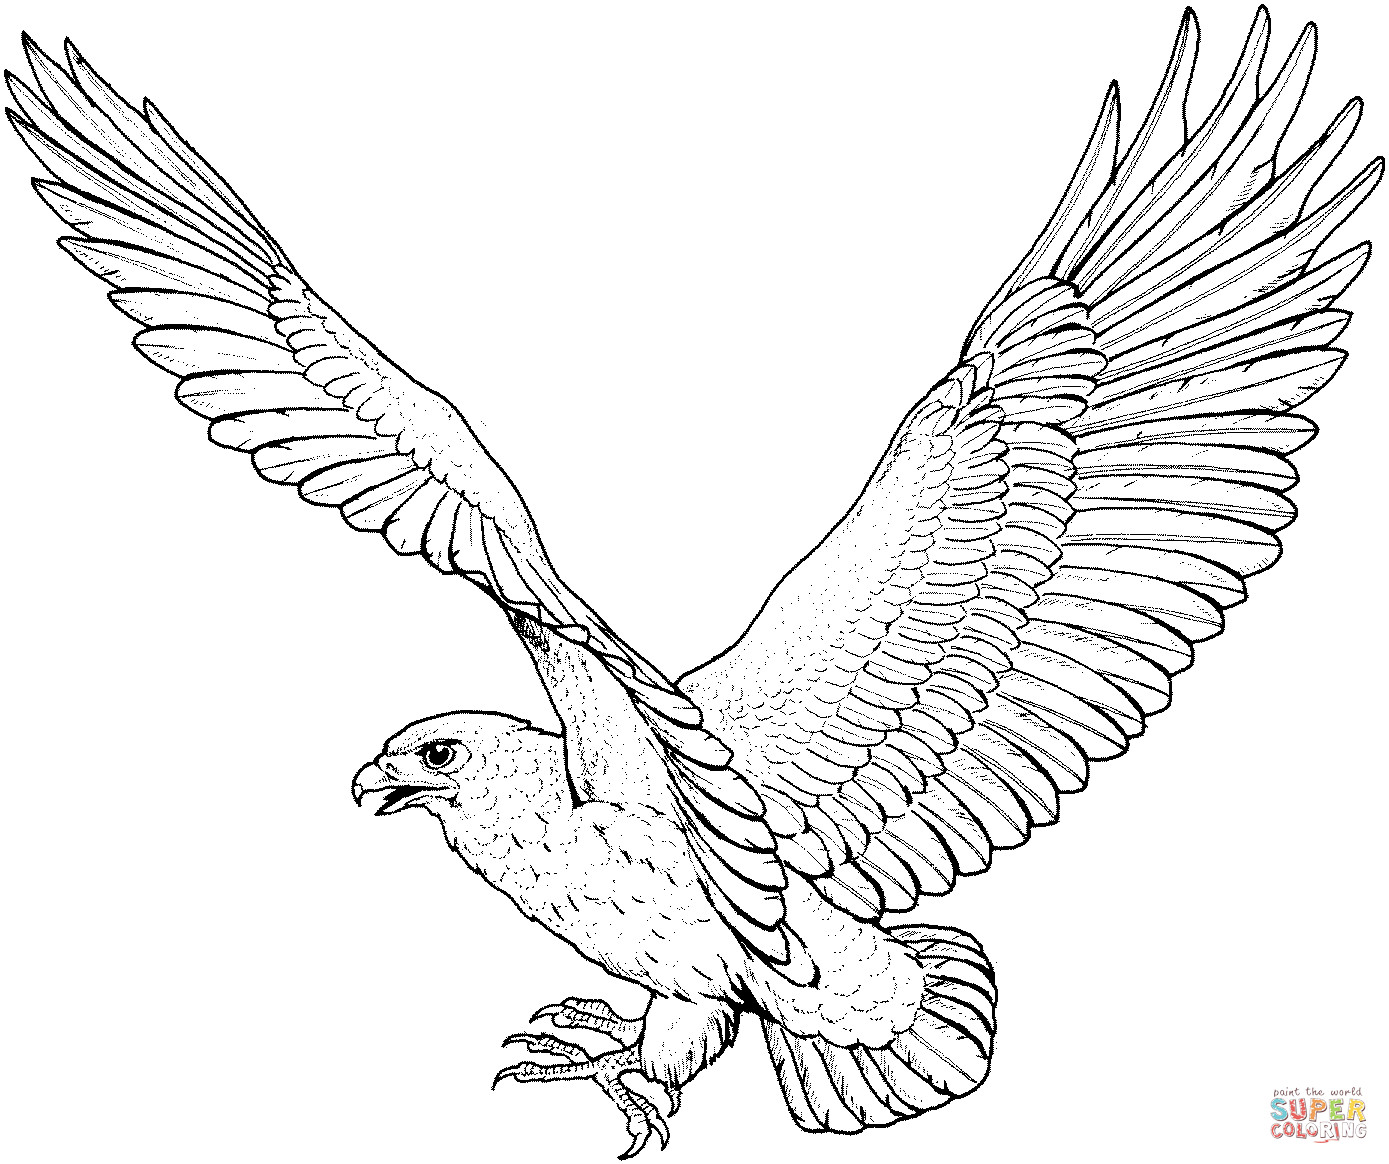 Hawk Coloring Pages
 Hawks coloring pages Free Coloring Pages